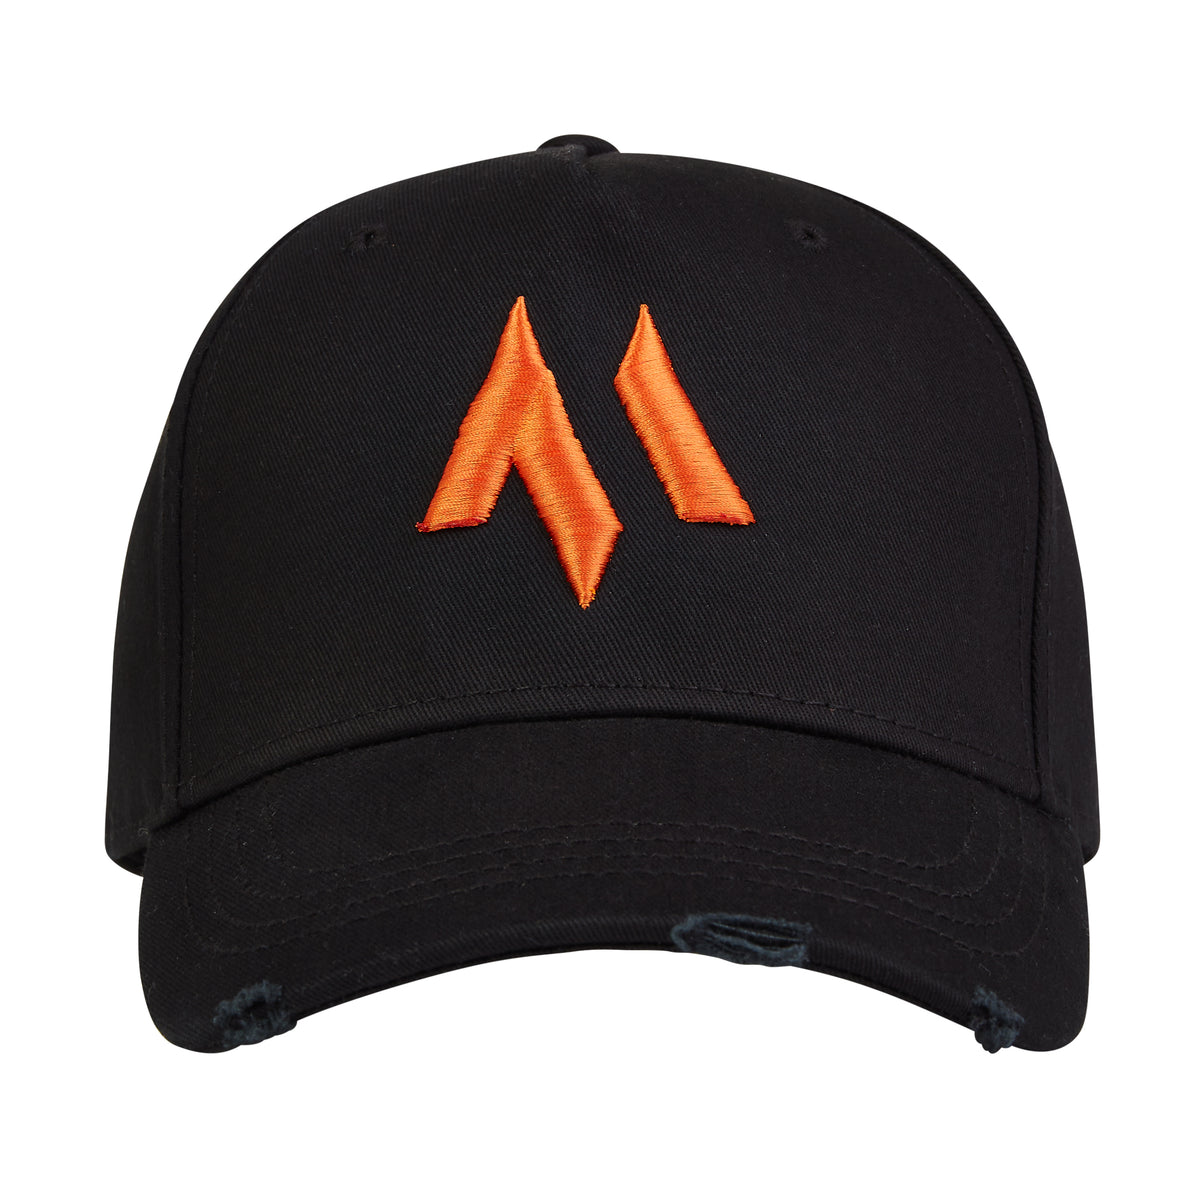 This is the new standard 3d distressed 5 panel in black with an orange emblem.  It is a large product image of the hat on a white background